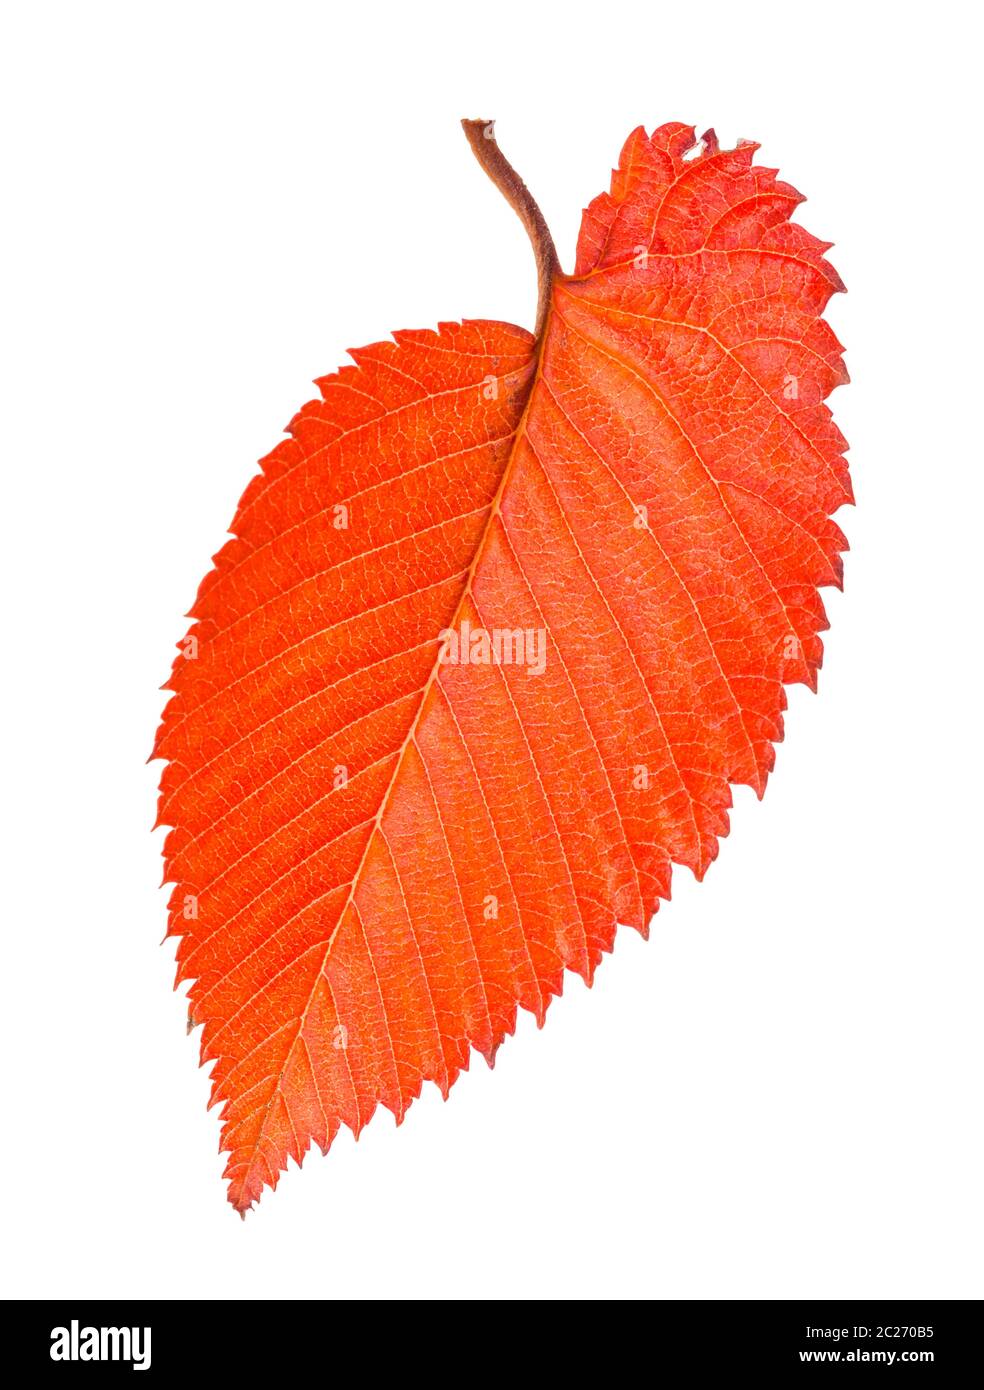 orange and red fallen leaf of elm tree isolated on white background Stock Photo